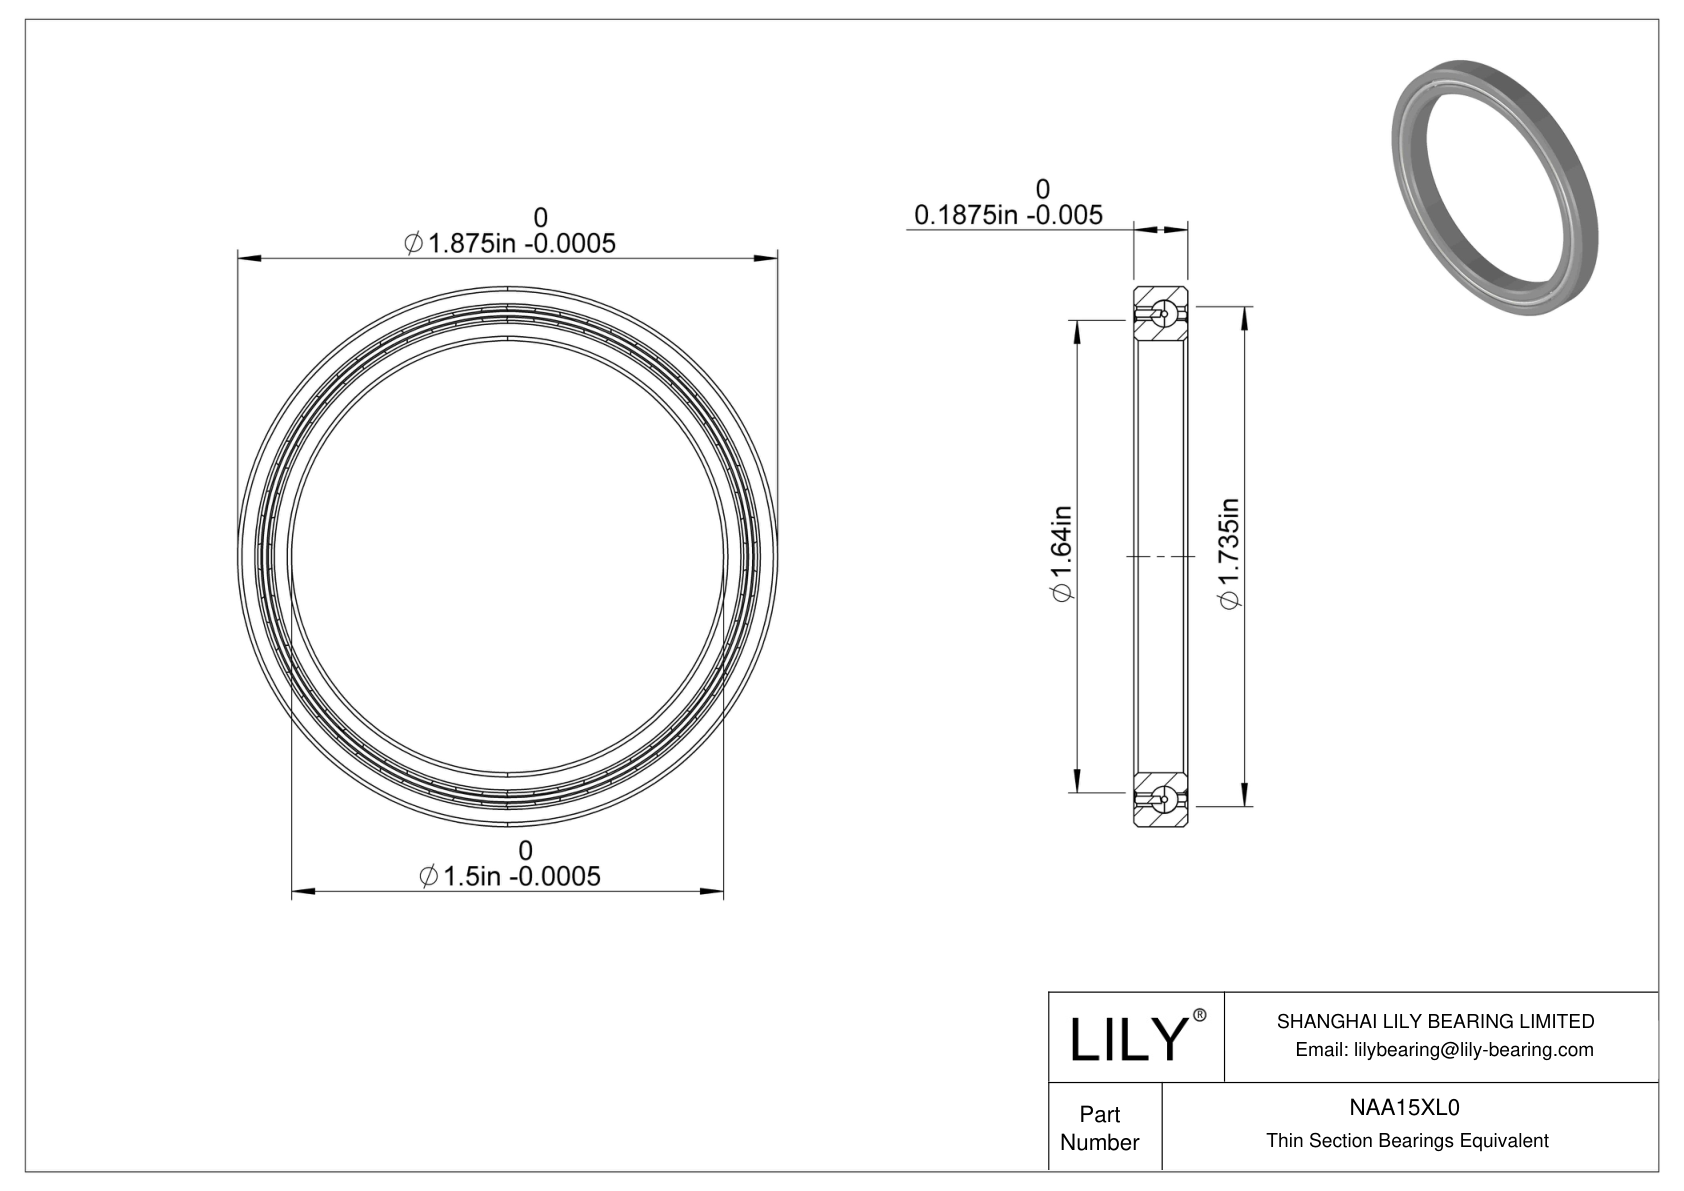 NAA15XL0 Constant Section (CS) Bearings cad drawing